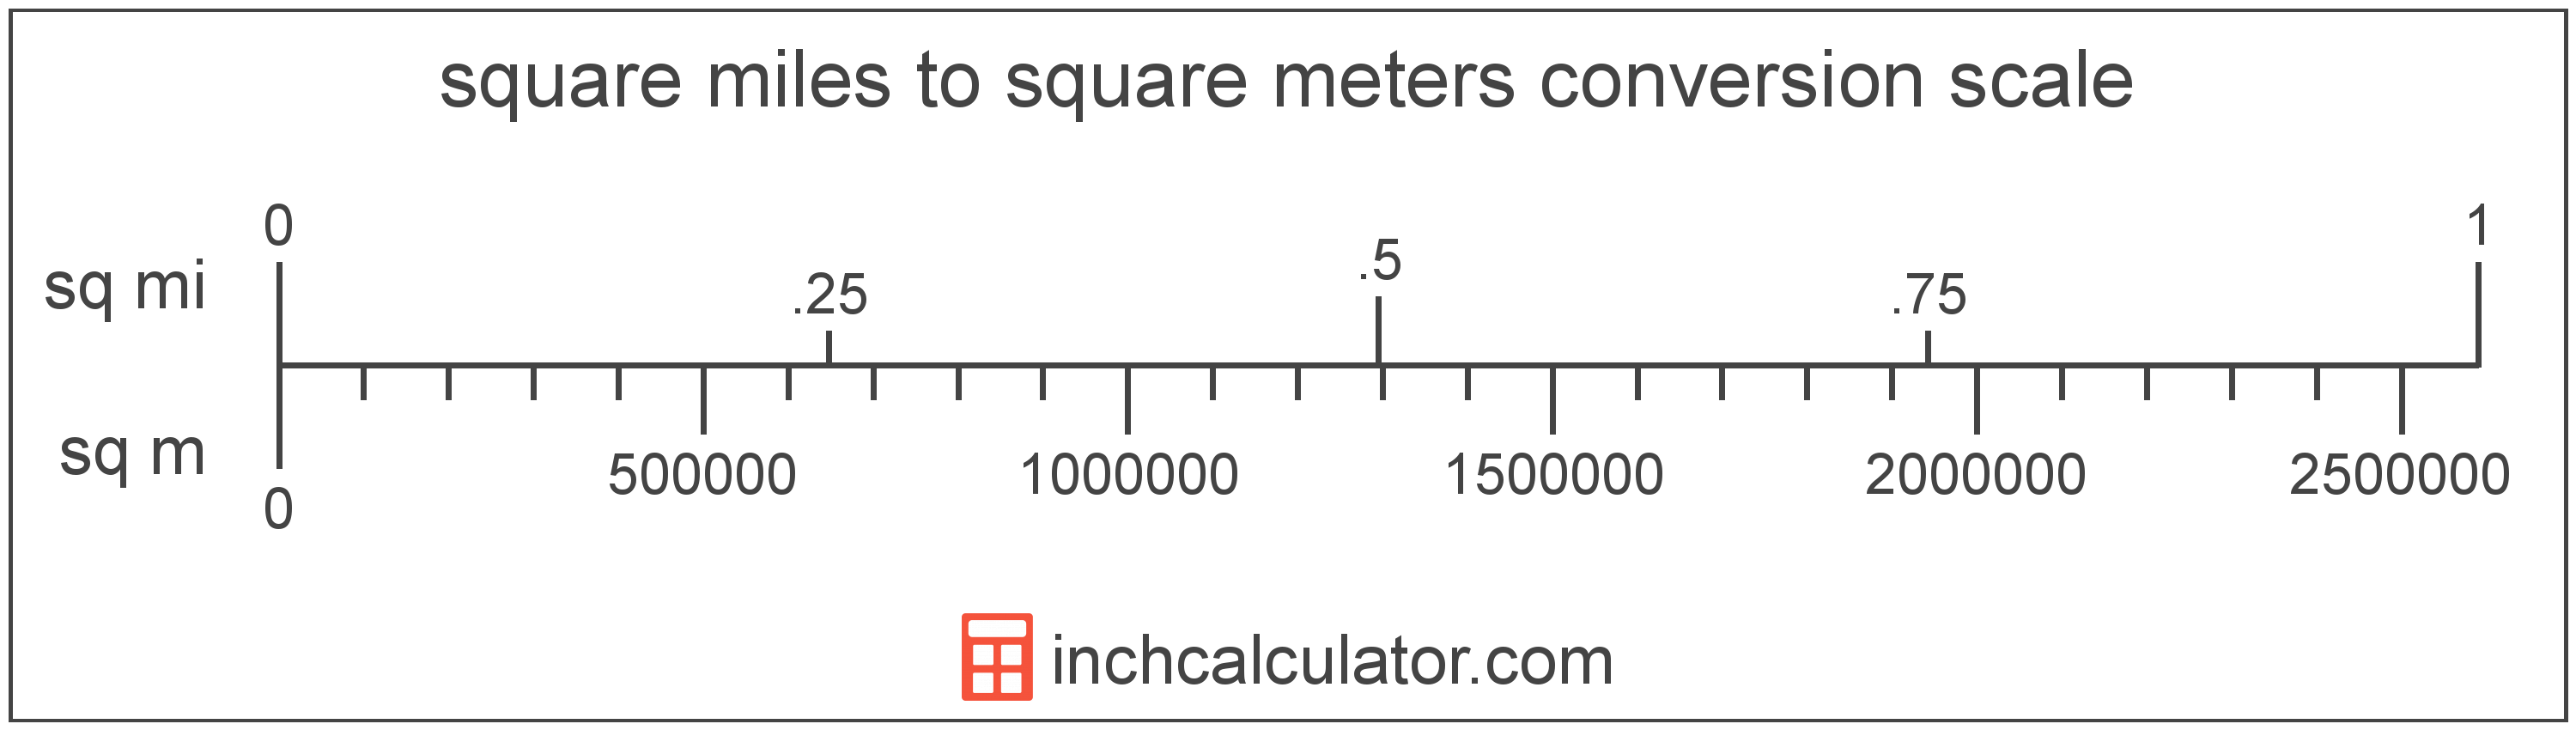 conversion scale showing square meters and equivalent square miles area values